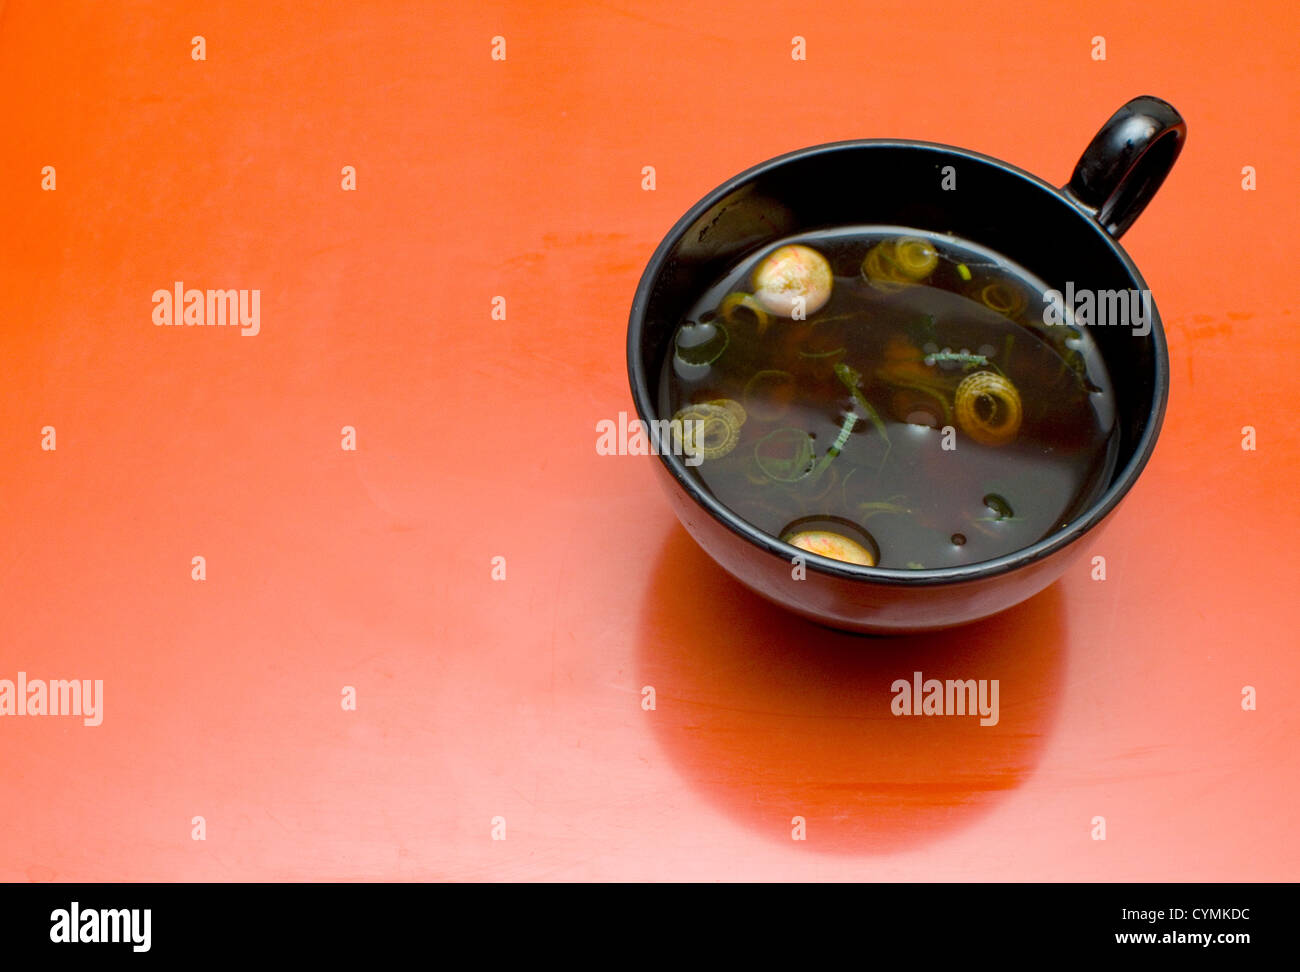 Miso soup in a black lacquer bowl on a orange / red background. Stock Photo